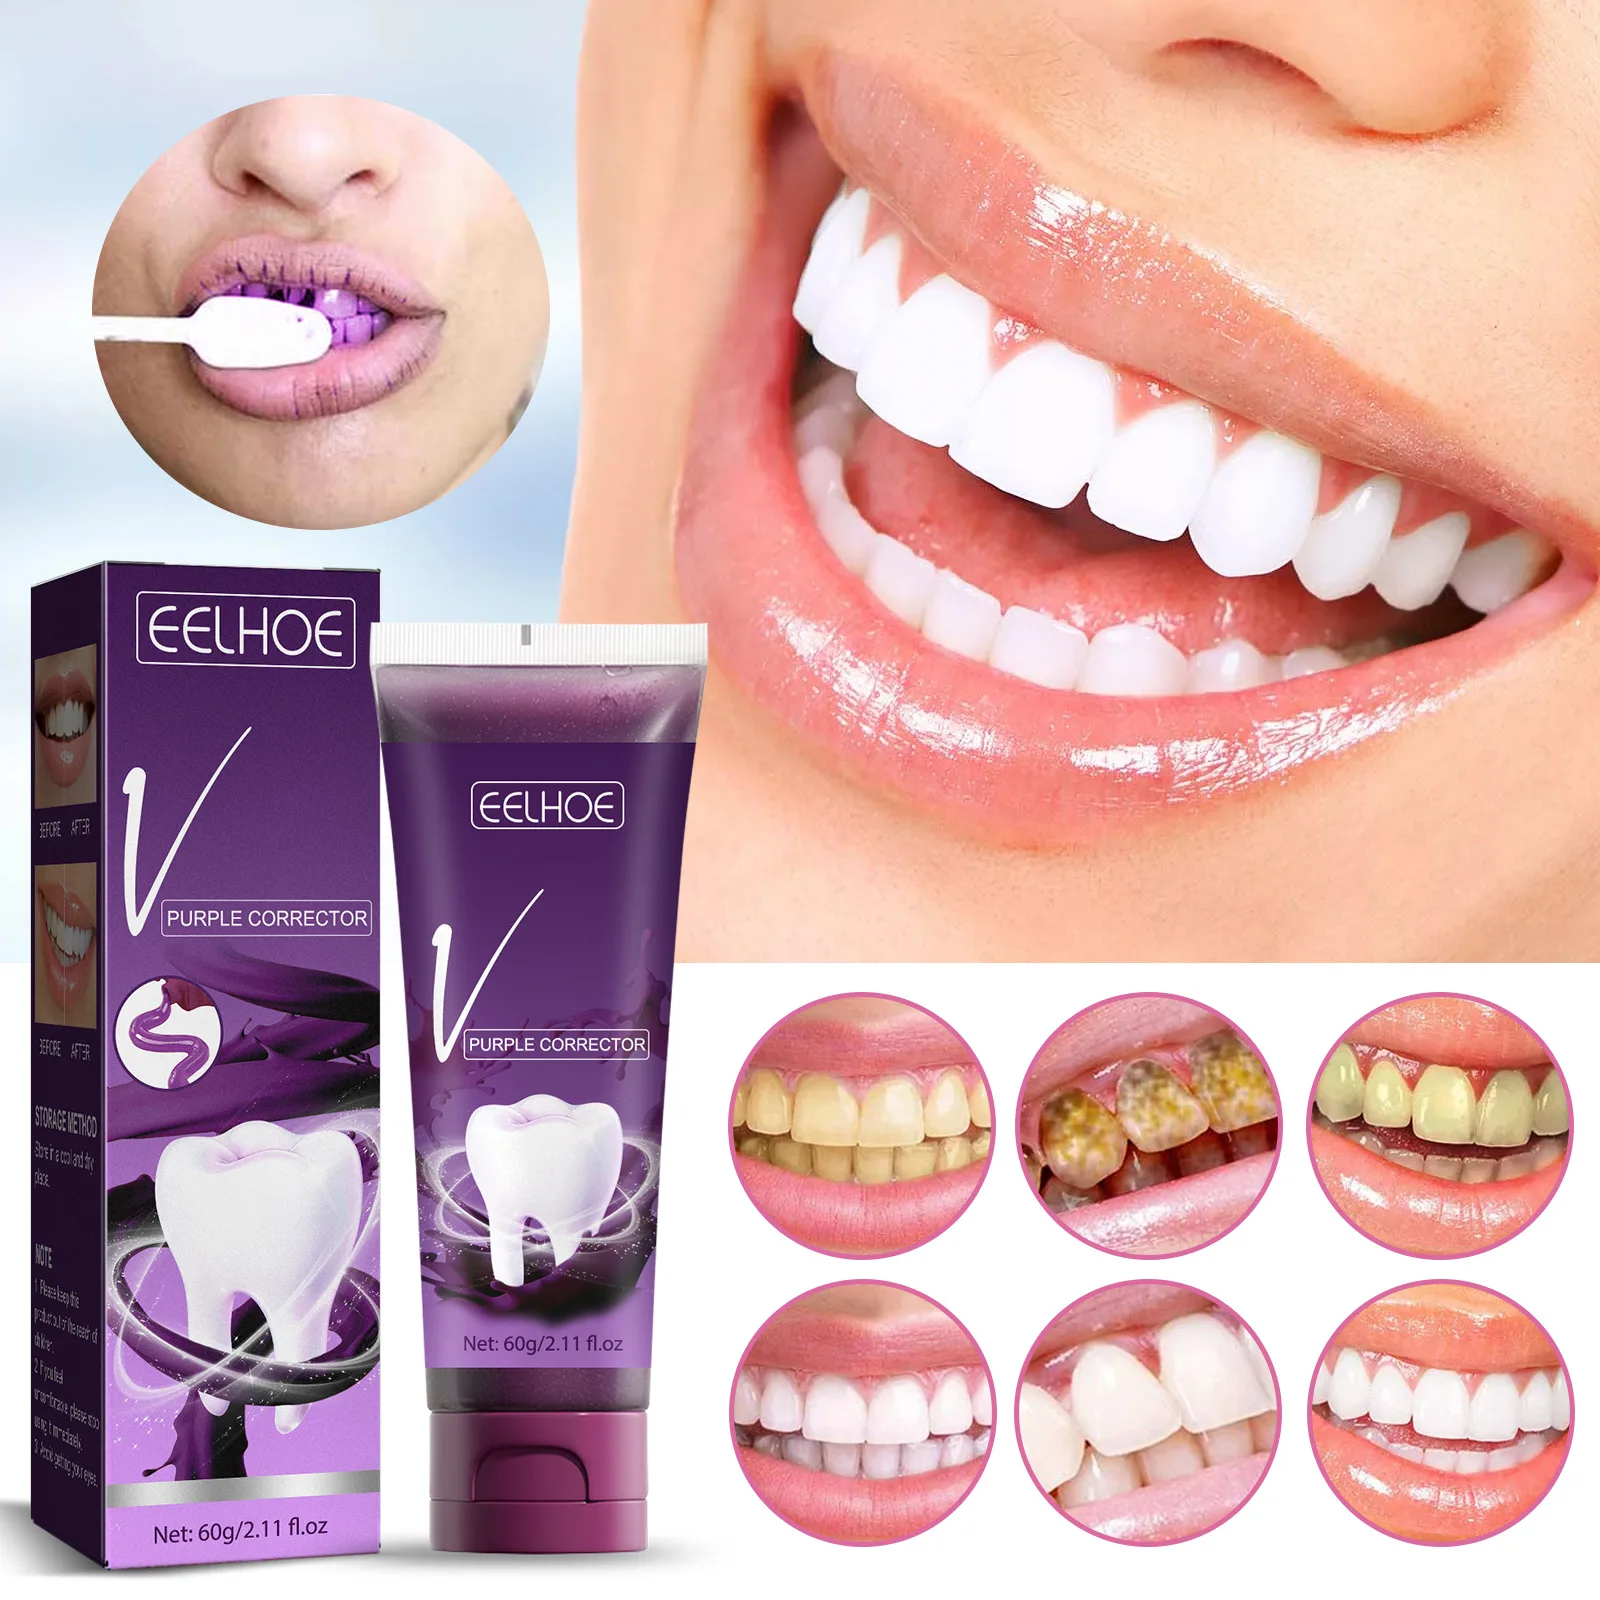 

V34 Colour Corrector Teeth Mouth Breathing Freshener Whitening Sensitive Teeth Toothpaste Remove Plaque Stains Care Toothpaste